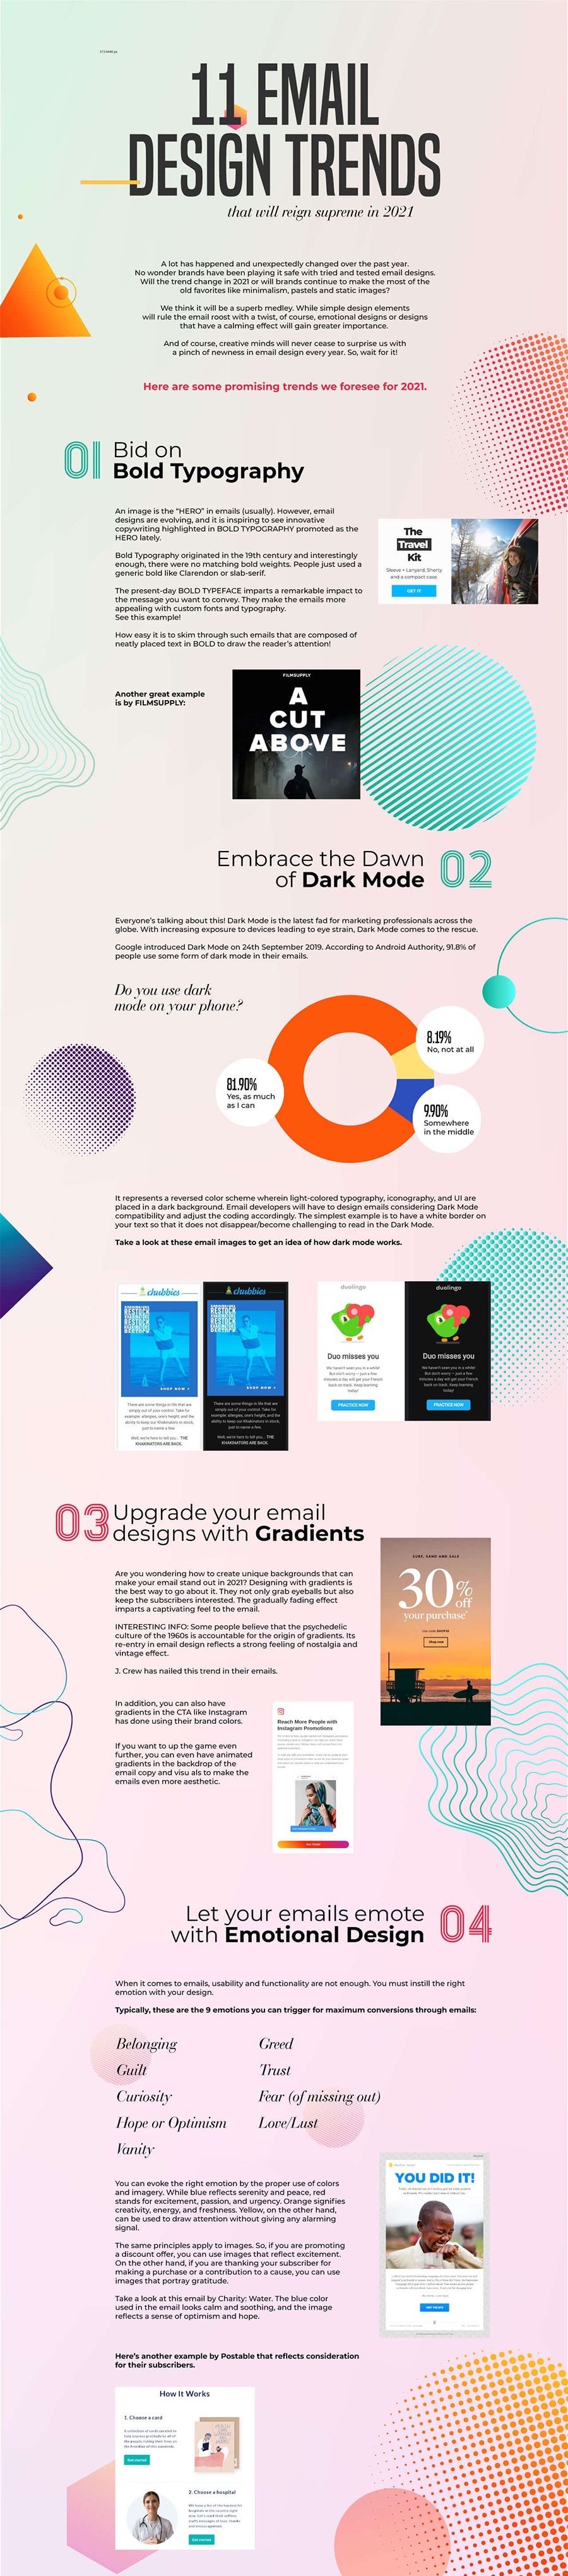 11 email design trends 2